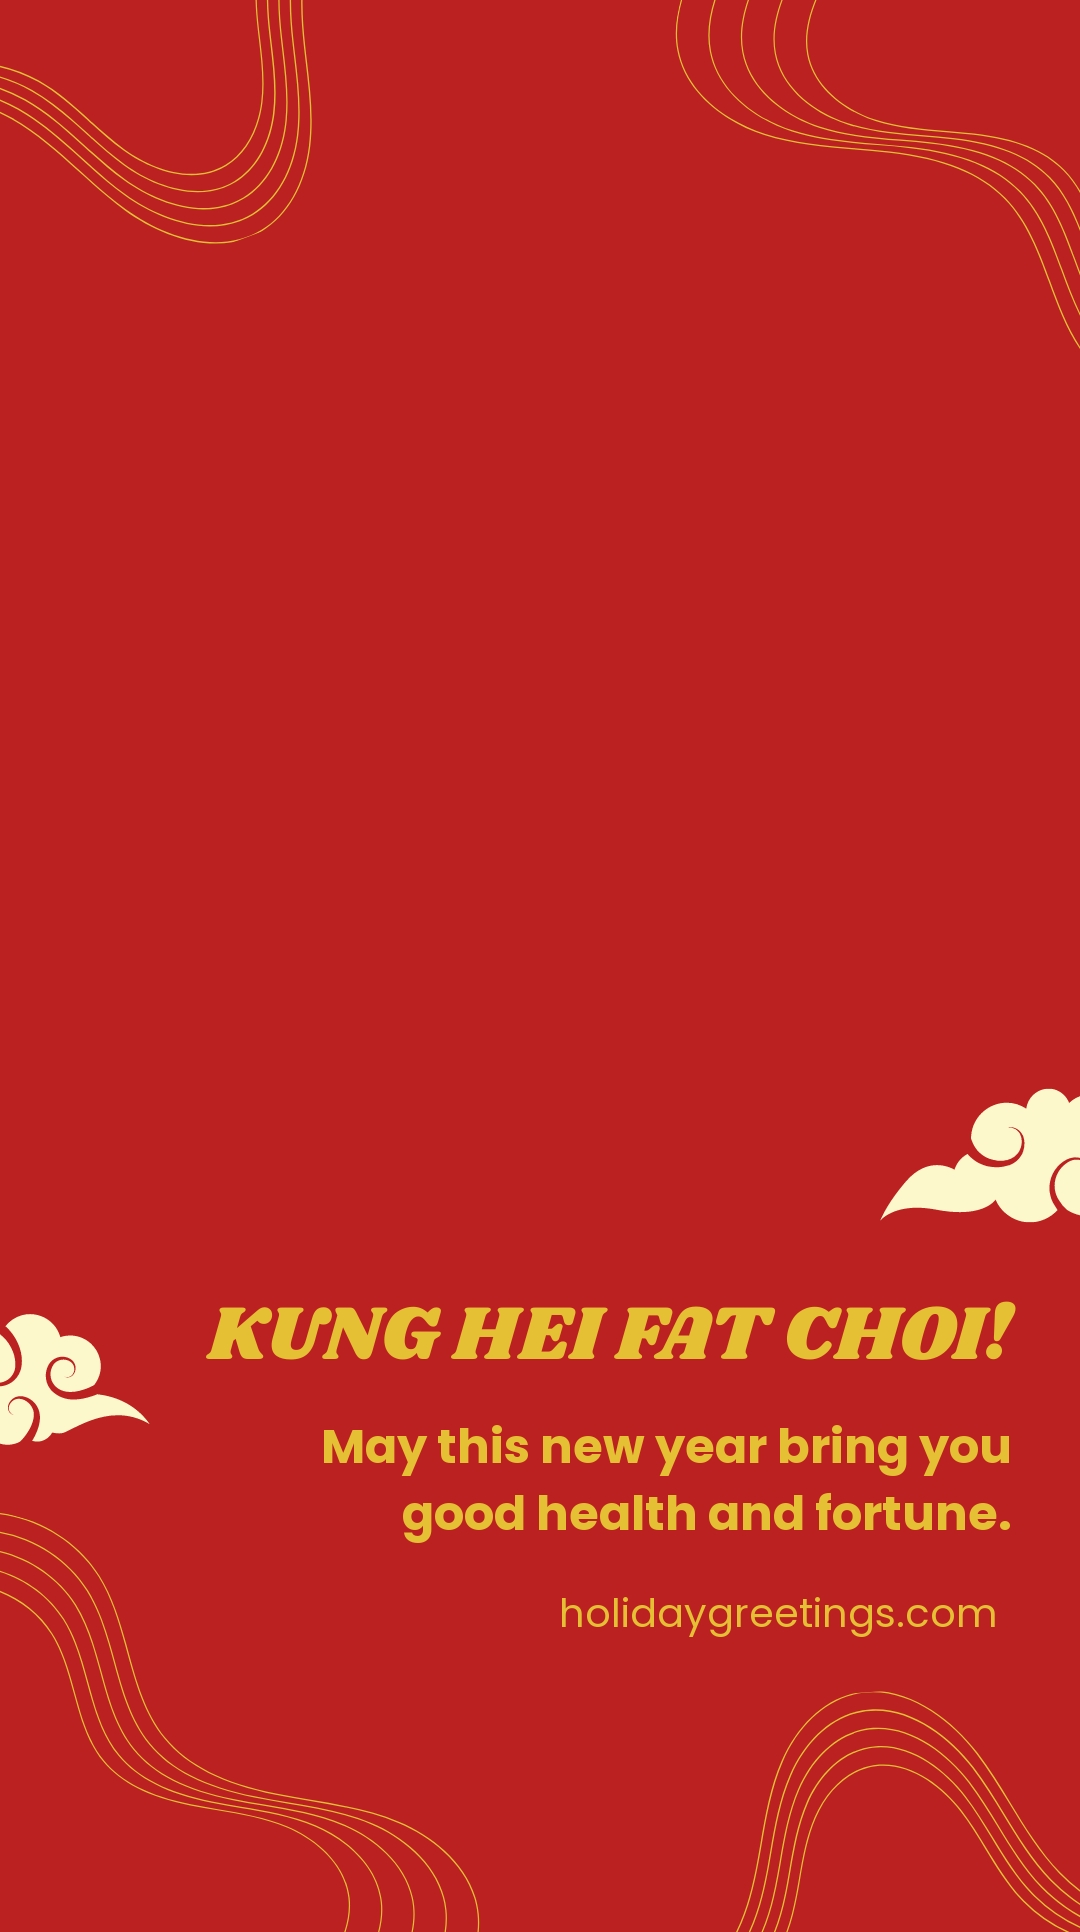 Happy Chinese New Year Snapchat Geofilter Template.jpe